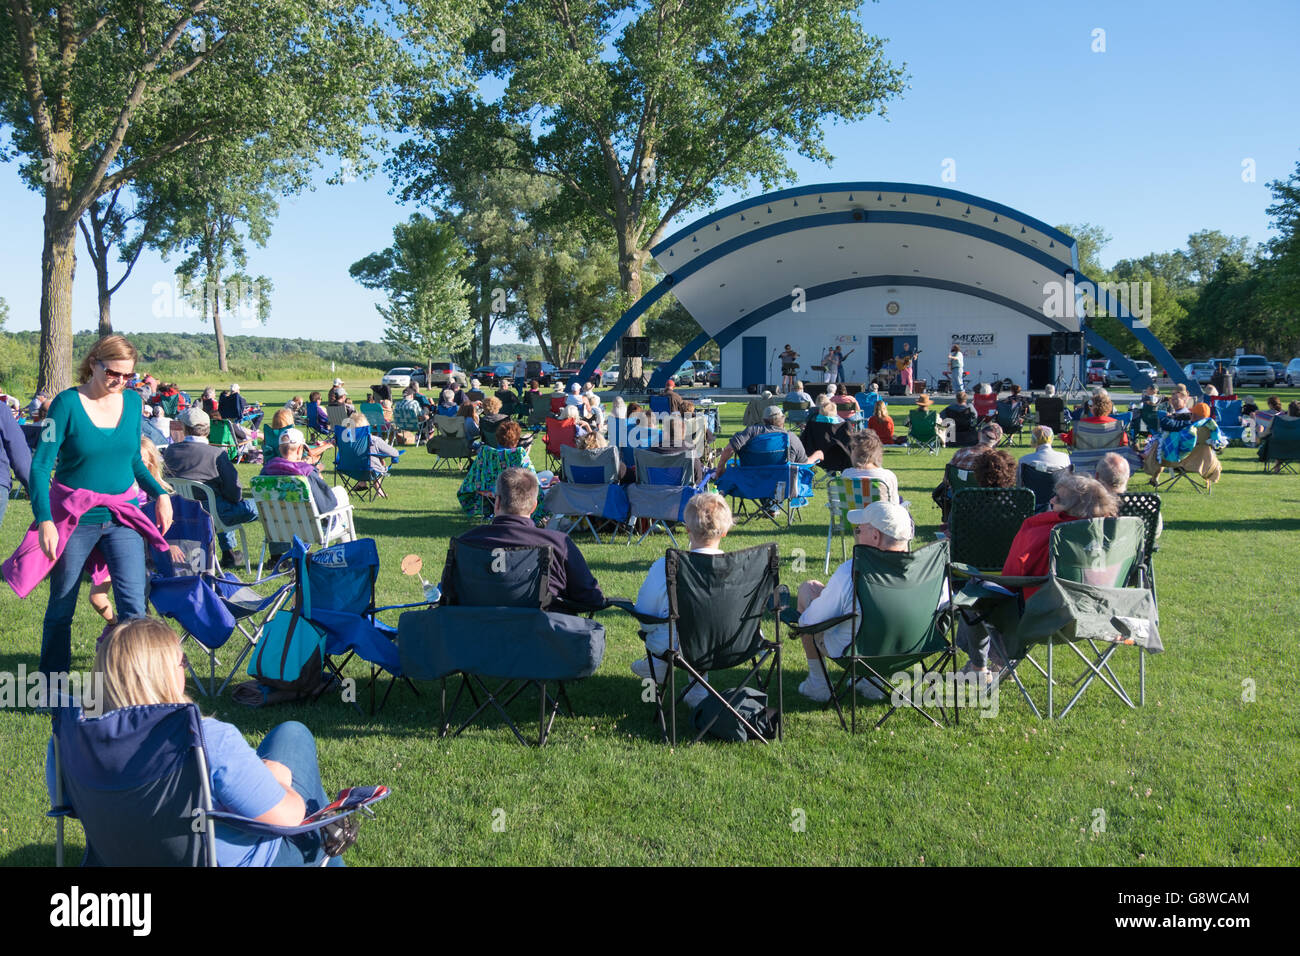 Outdoor community concert at the band shell in Montague, Michigan, USA. Stock Photo